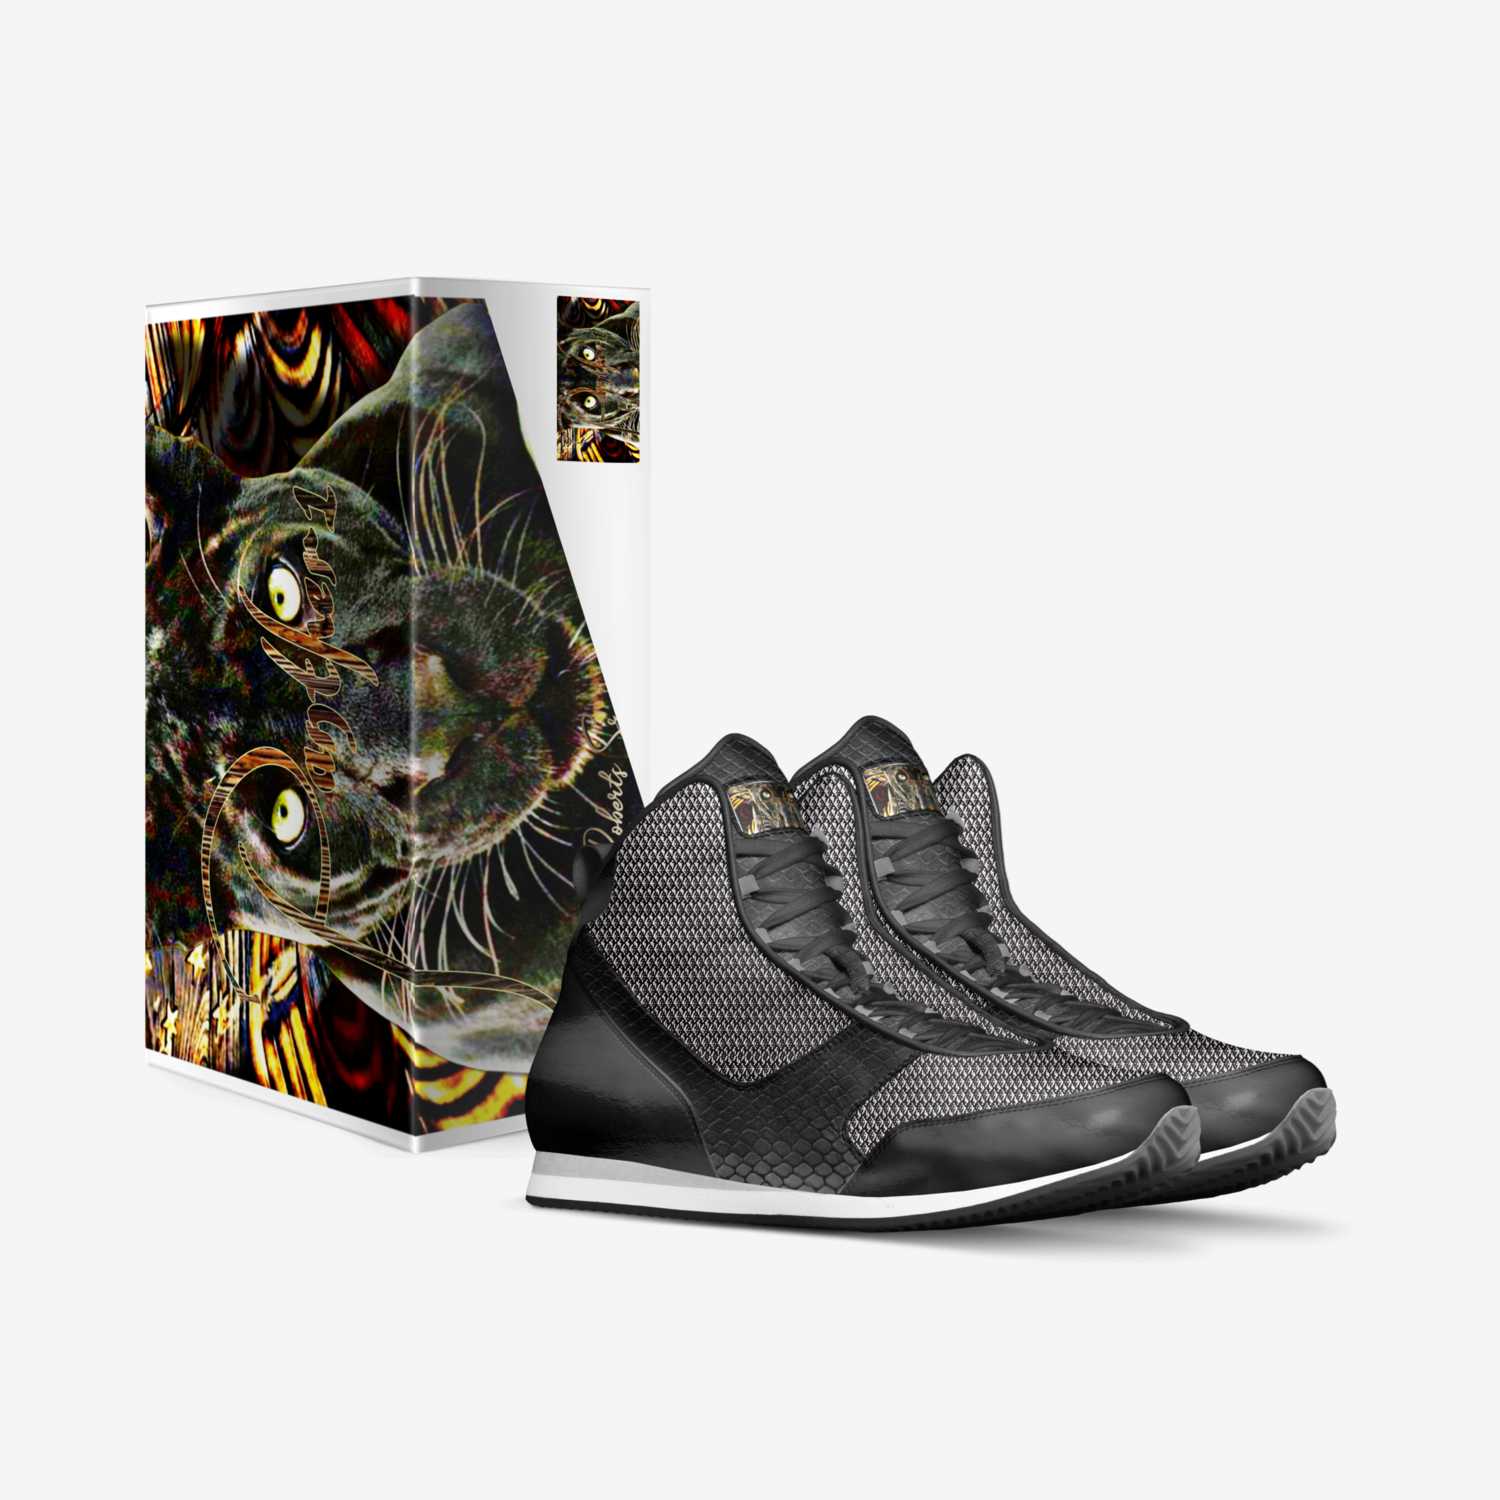 THE PANTHER 1 custom made in Italy shoes by Ronald Roberts | Box view